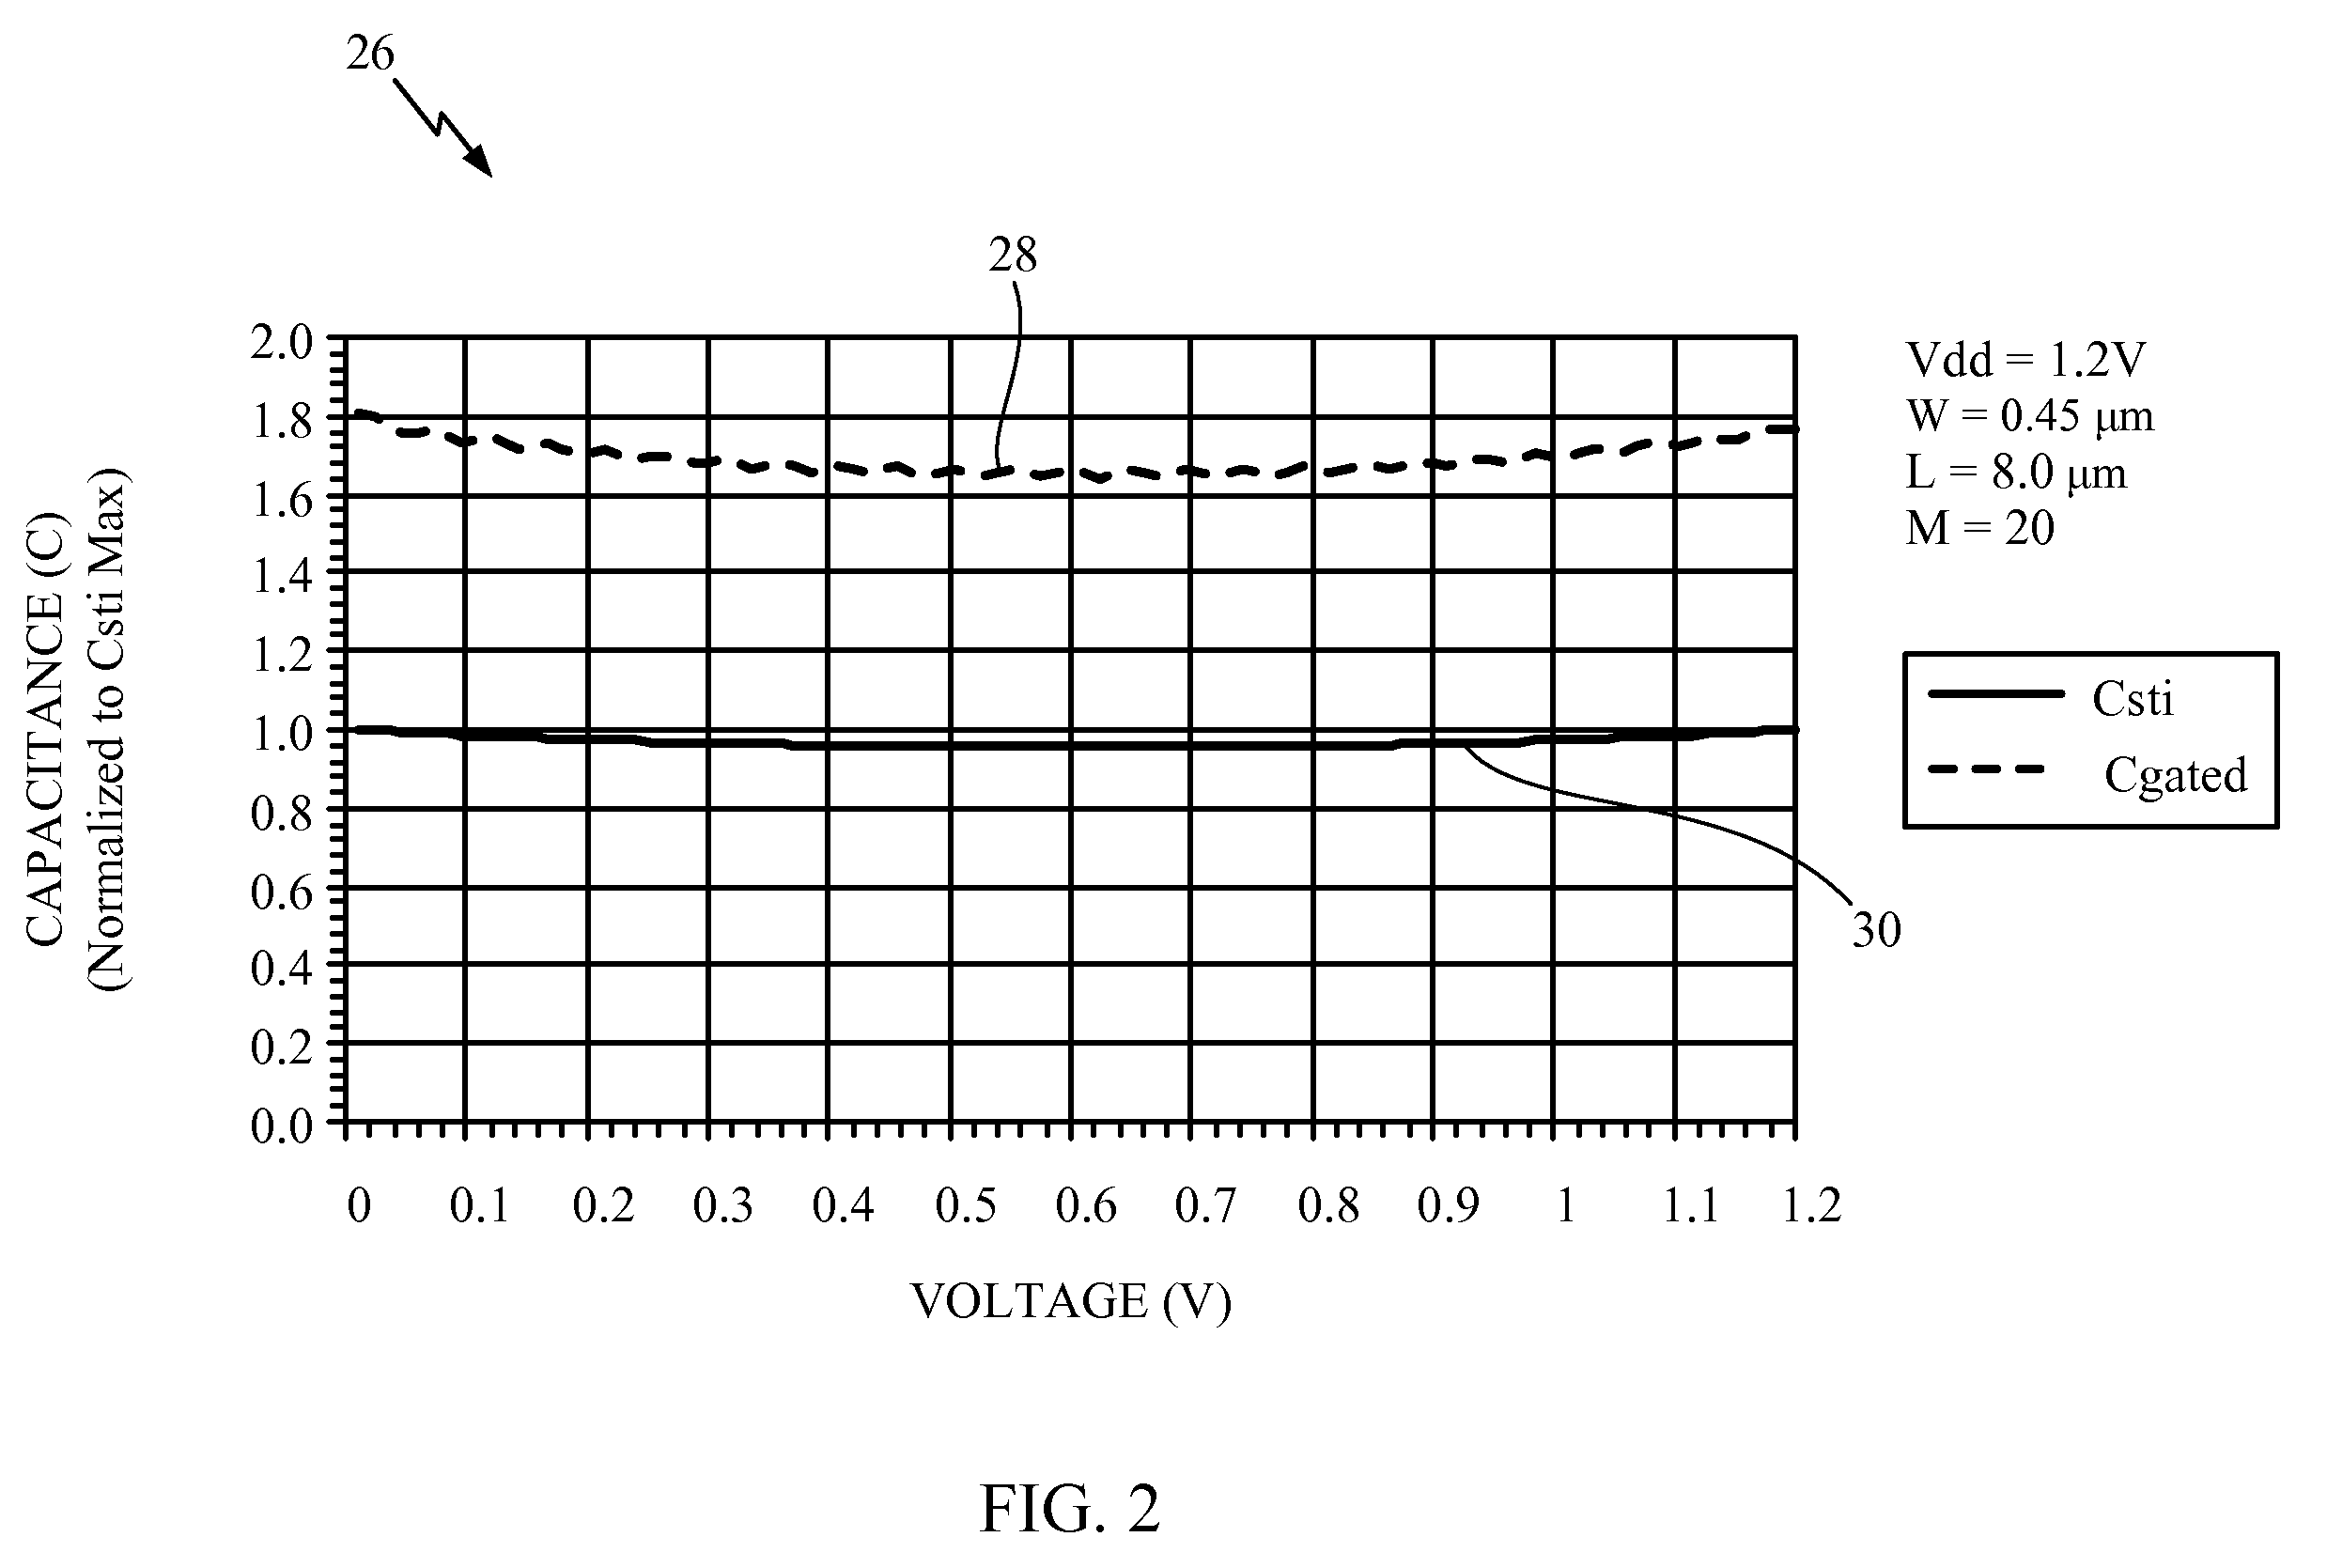 Gated diode having at least one lightly-doped drain (LDD) implant blocked and circuits and methods employing same